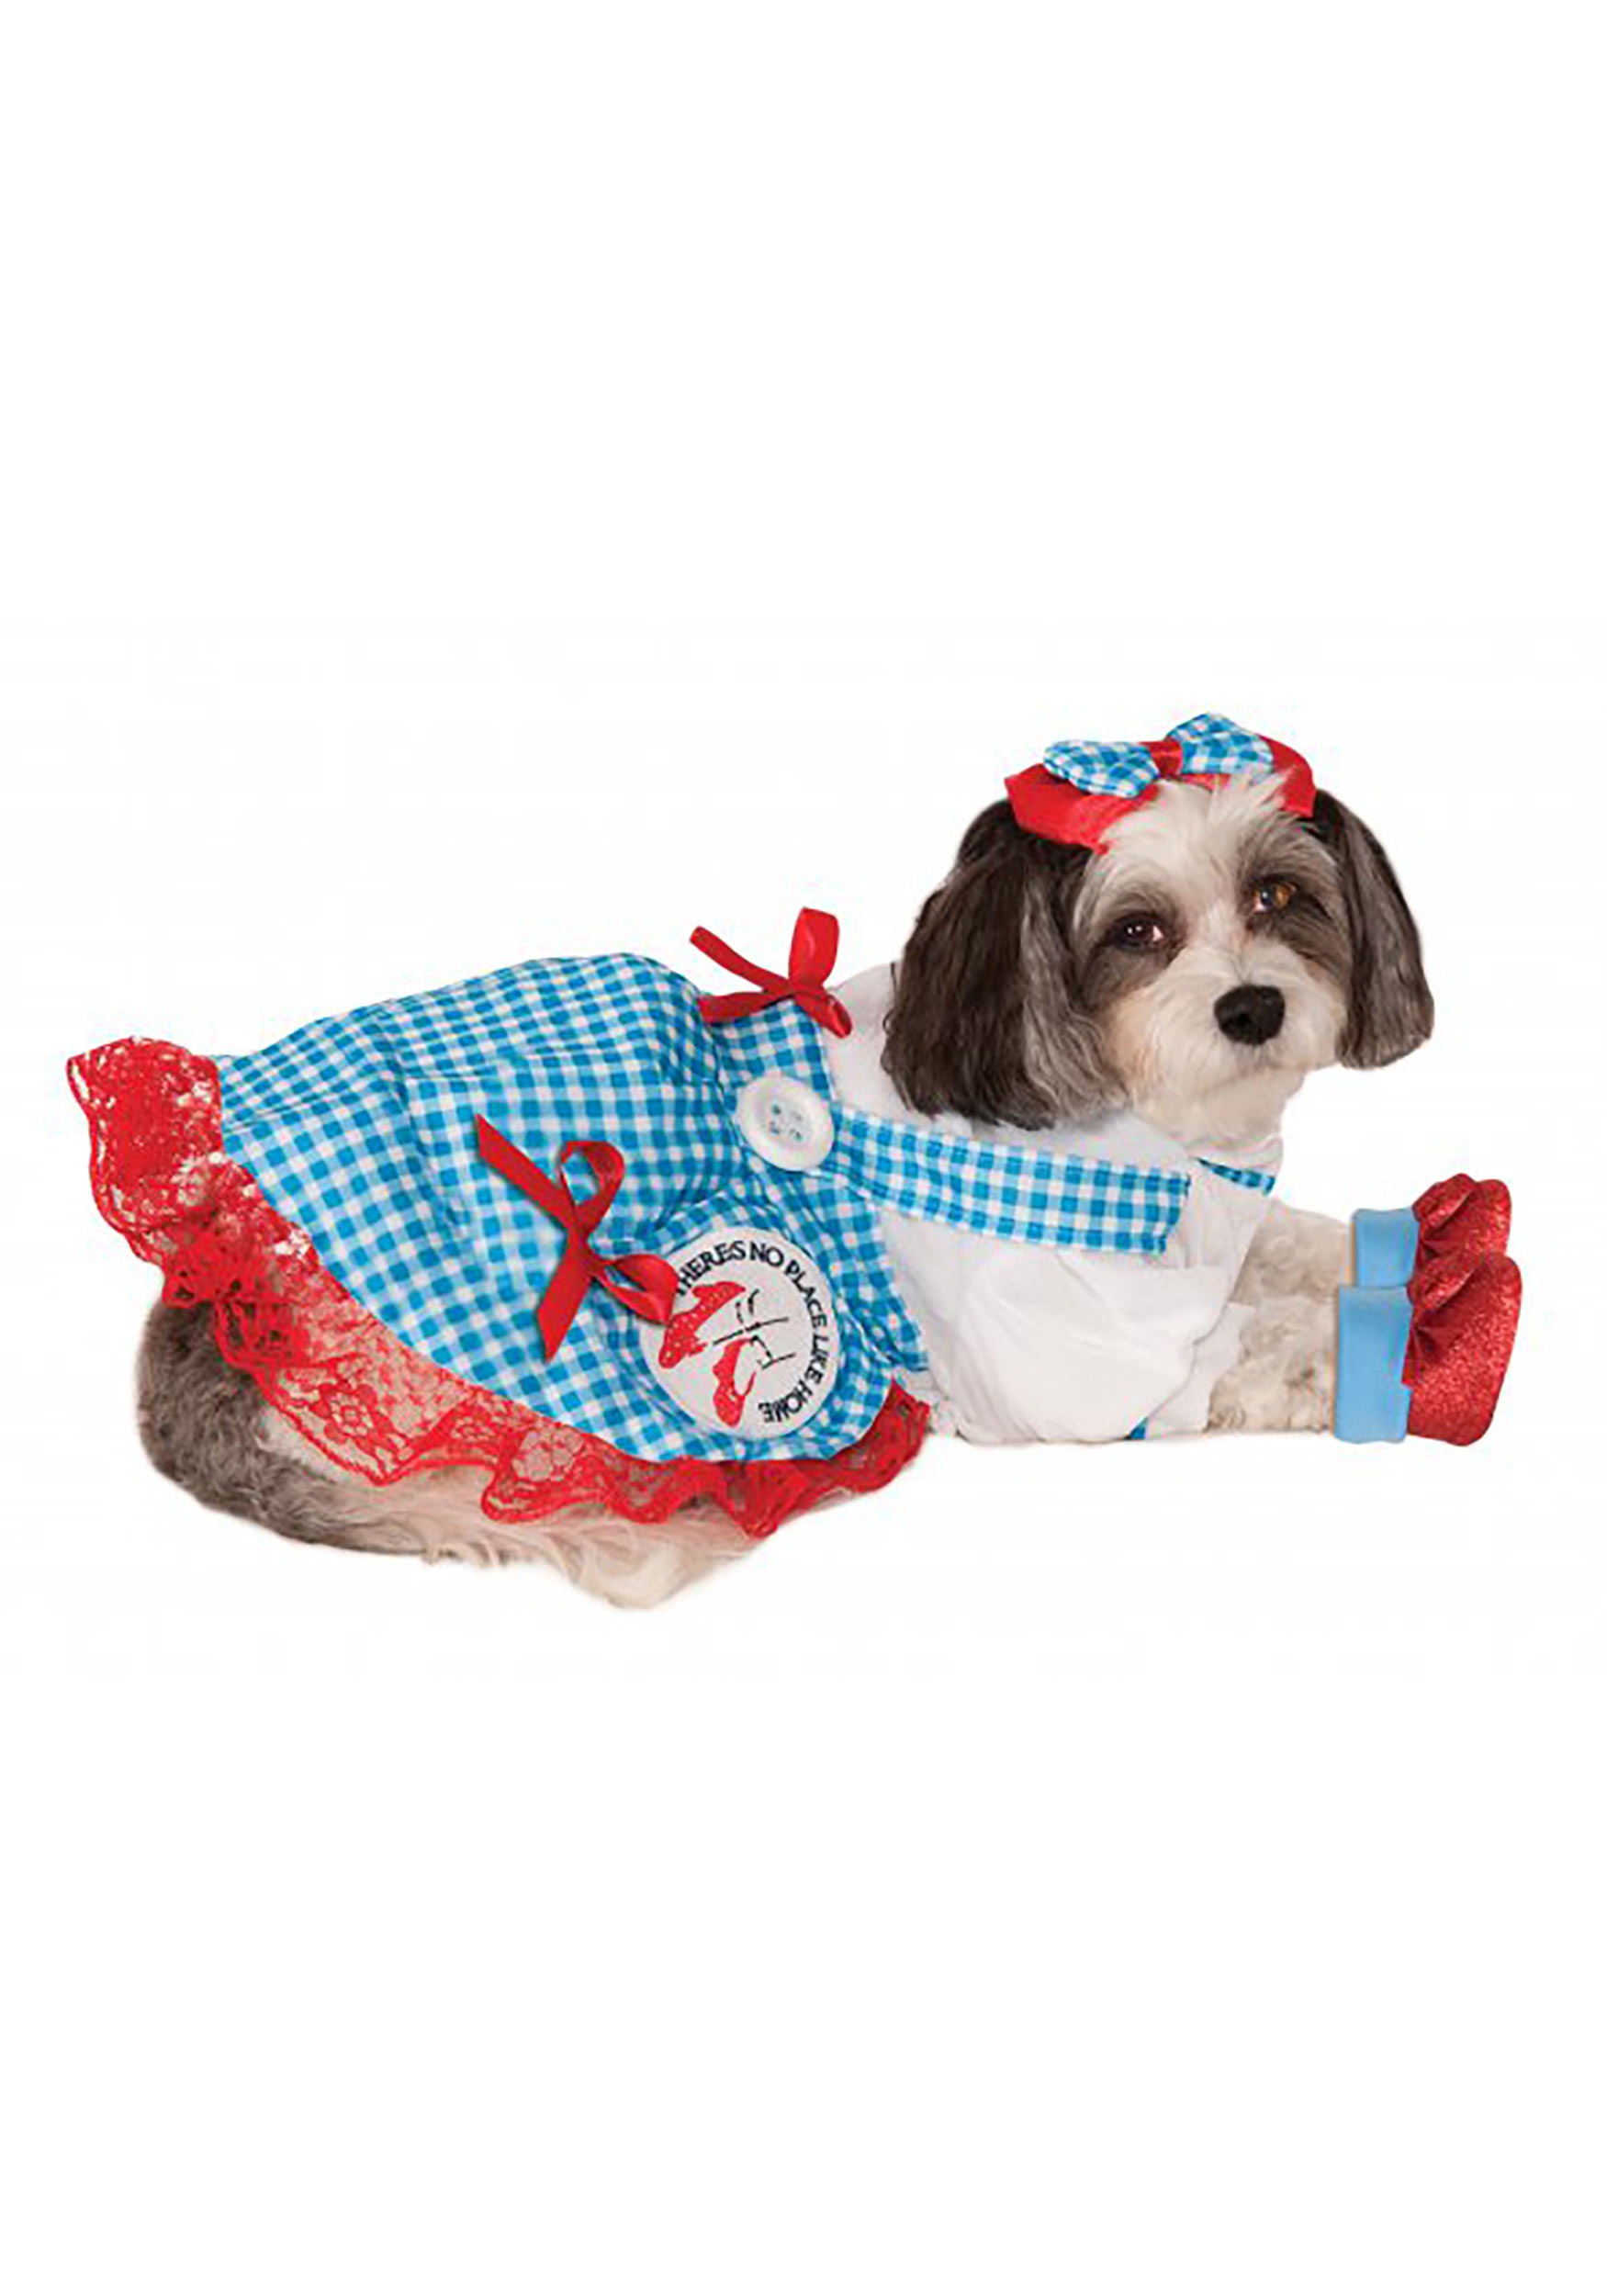 Dorothy Costume for Pets